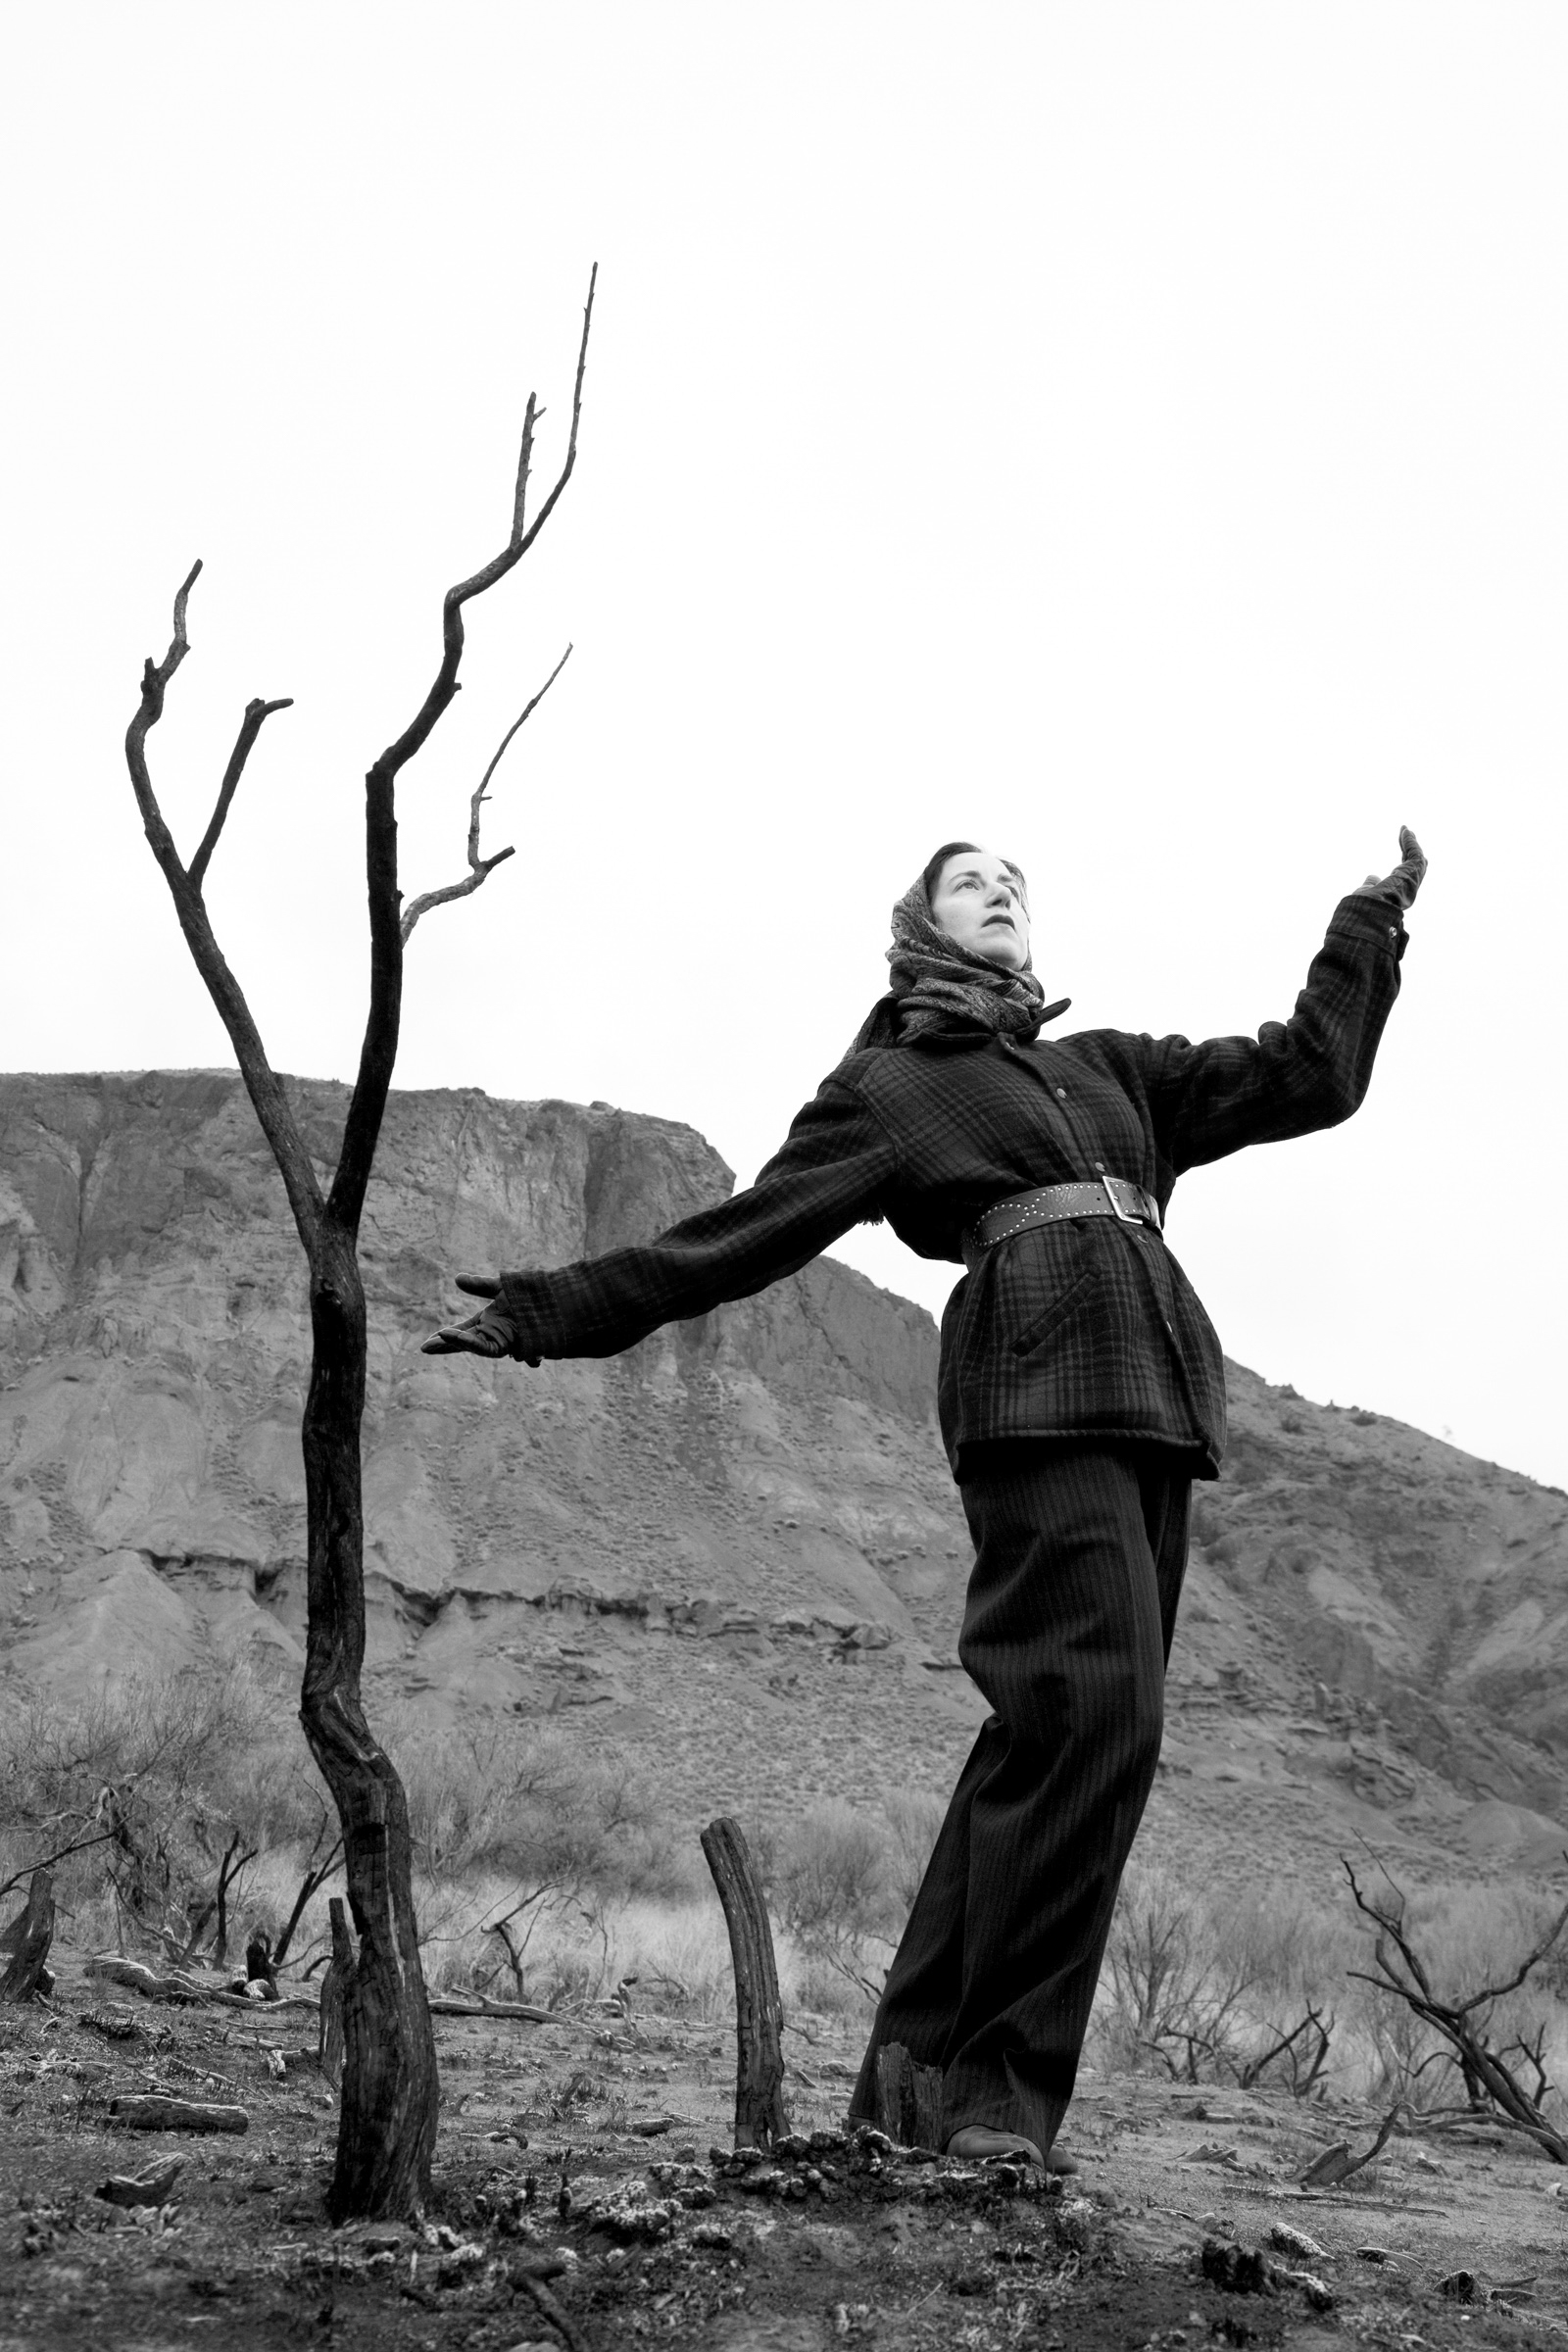     Carol Sawyer, Natalie Brettschneider performs “Burnt Tree,” Kamloops, c.1949, 2001. Courtesy of the artist and Republic Gallery, Vancouver.

